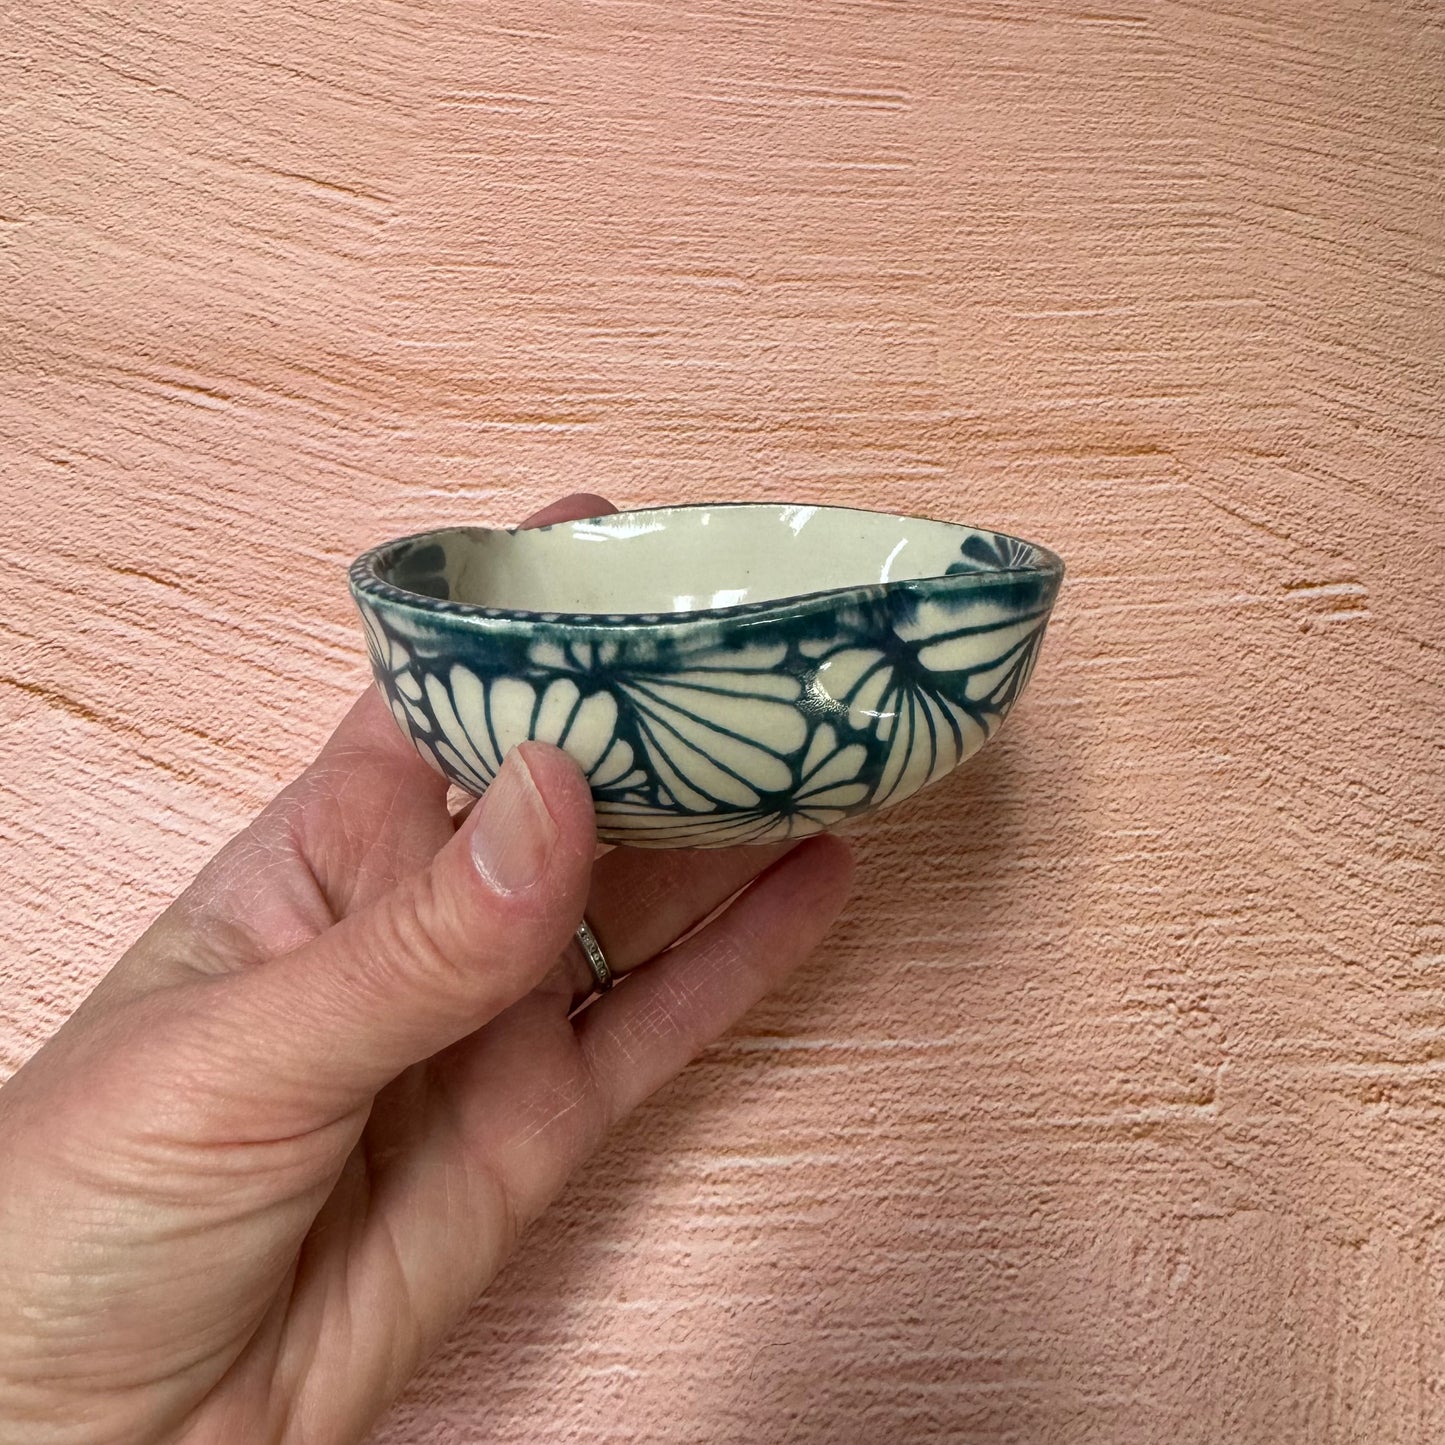 SECOND Small Heart Bowl